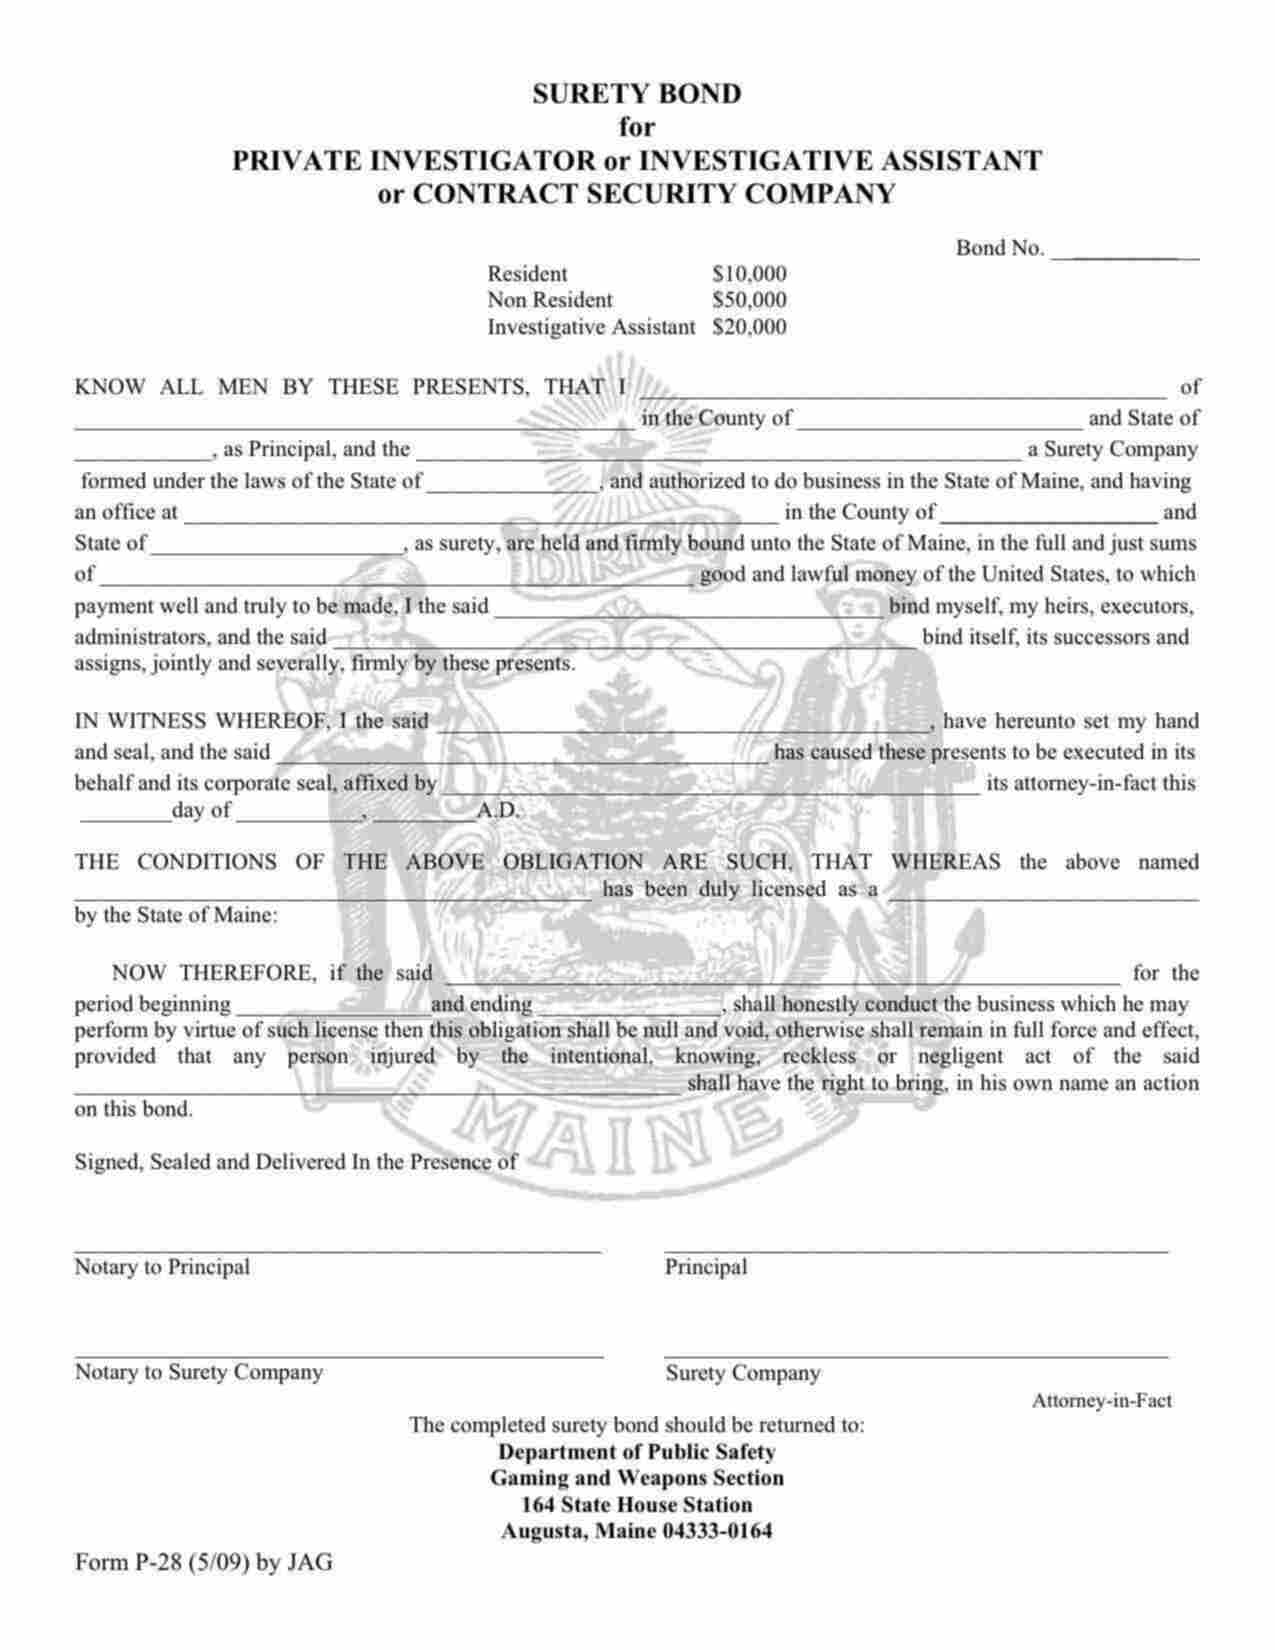 Maine Contract Security Company: Non-Resident Bond Form